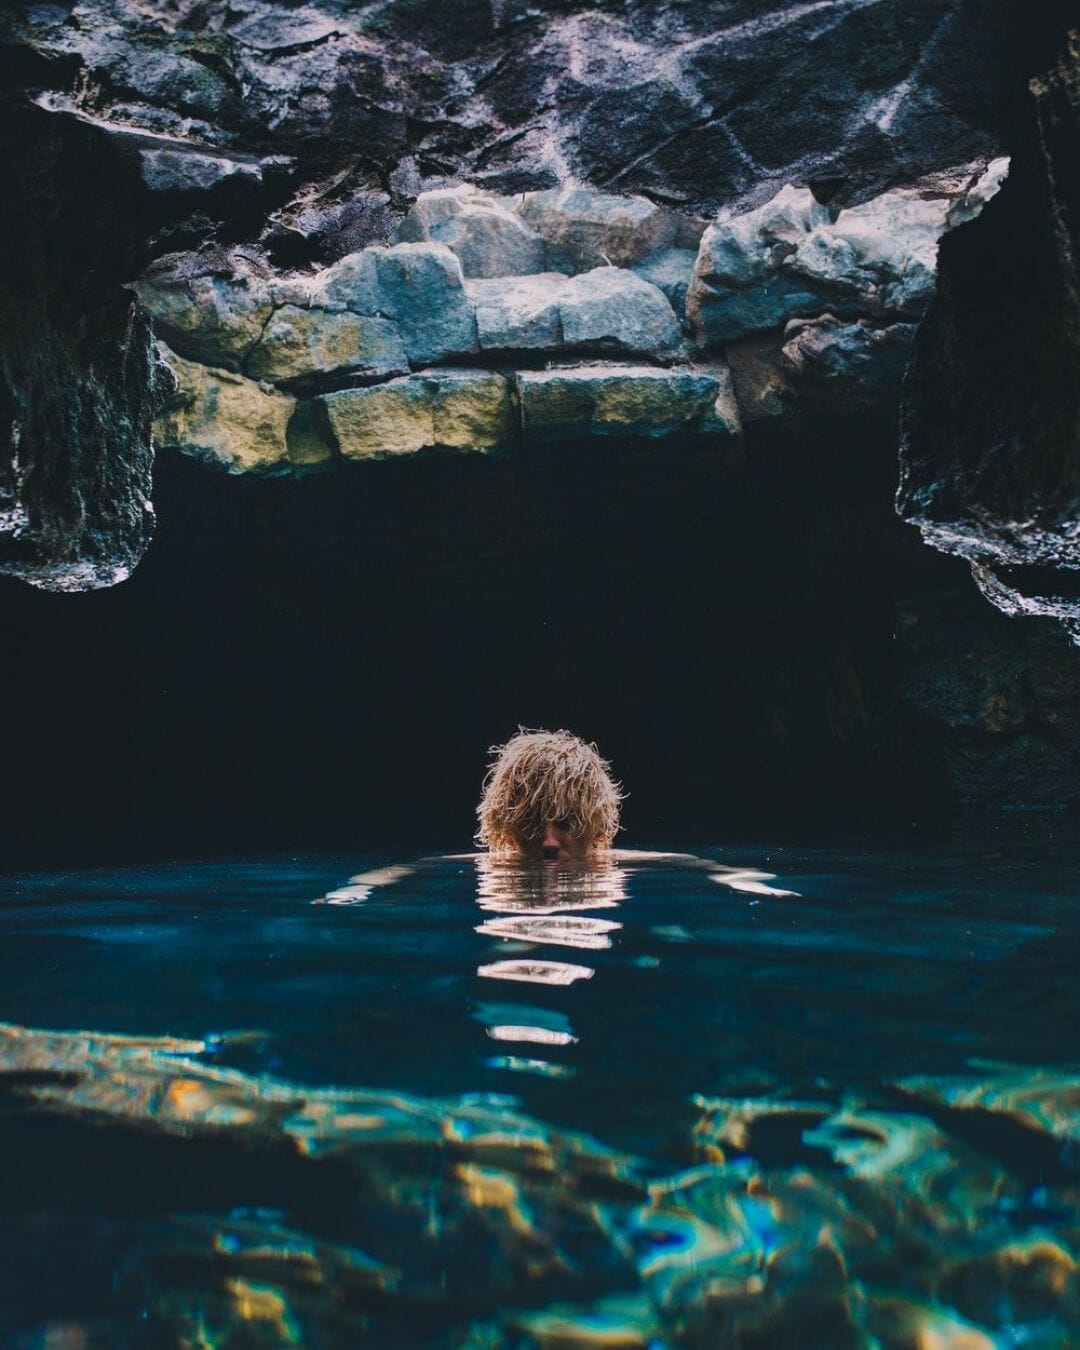 A person swimming in a cave - Horror